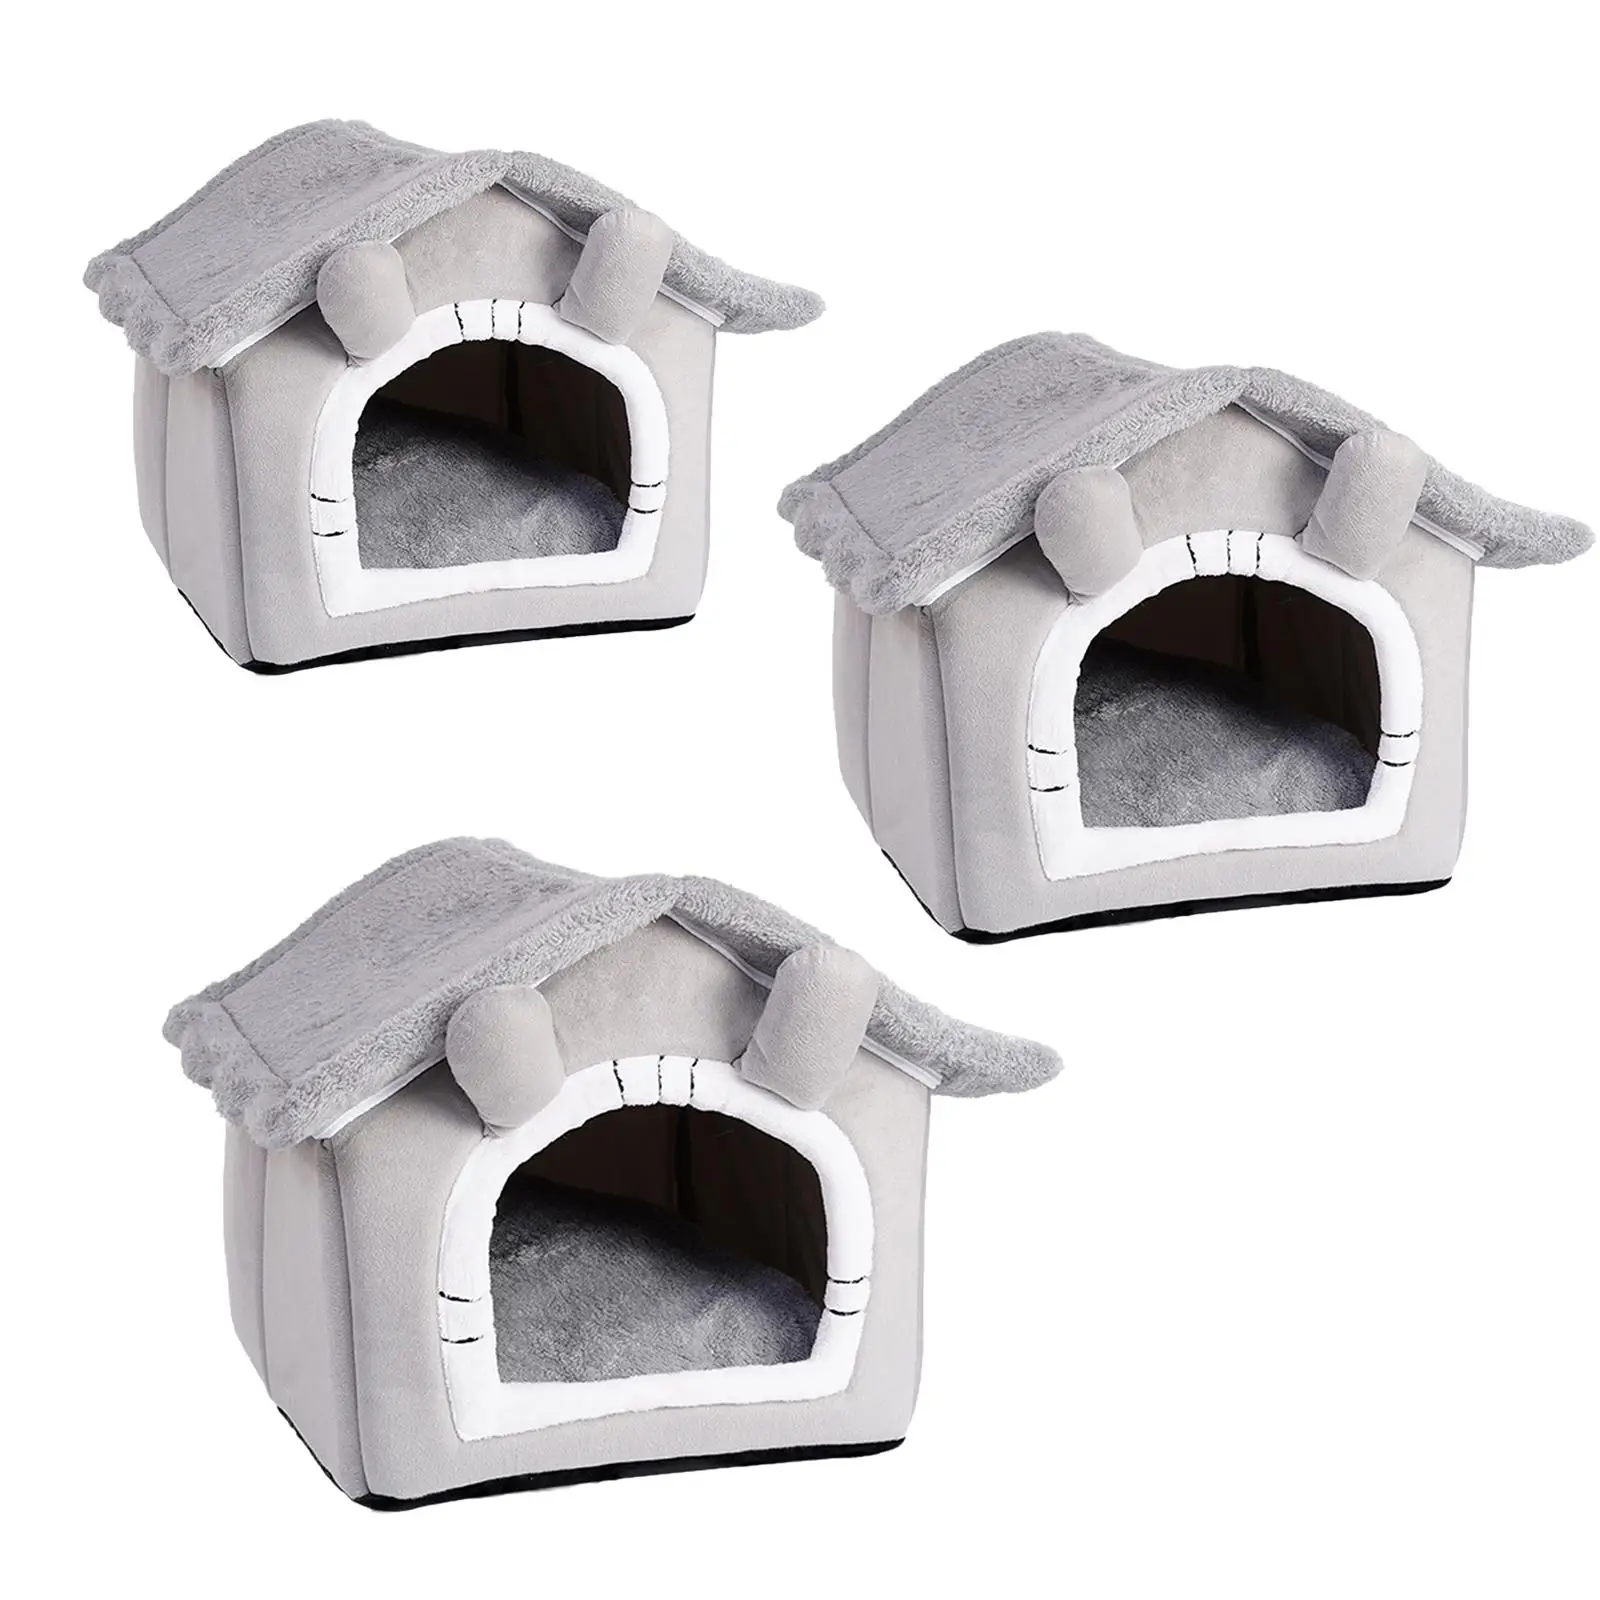 Foldable Dog House for Small Medium Large Dogs Cats Dog Villa Pets Supplies